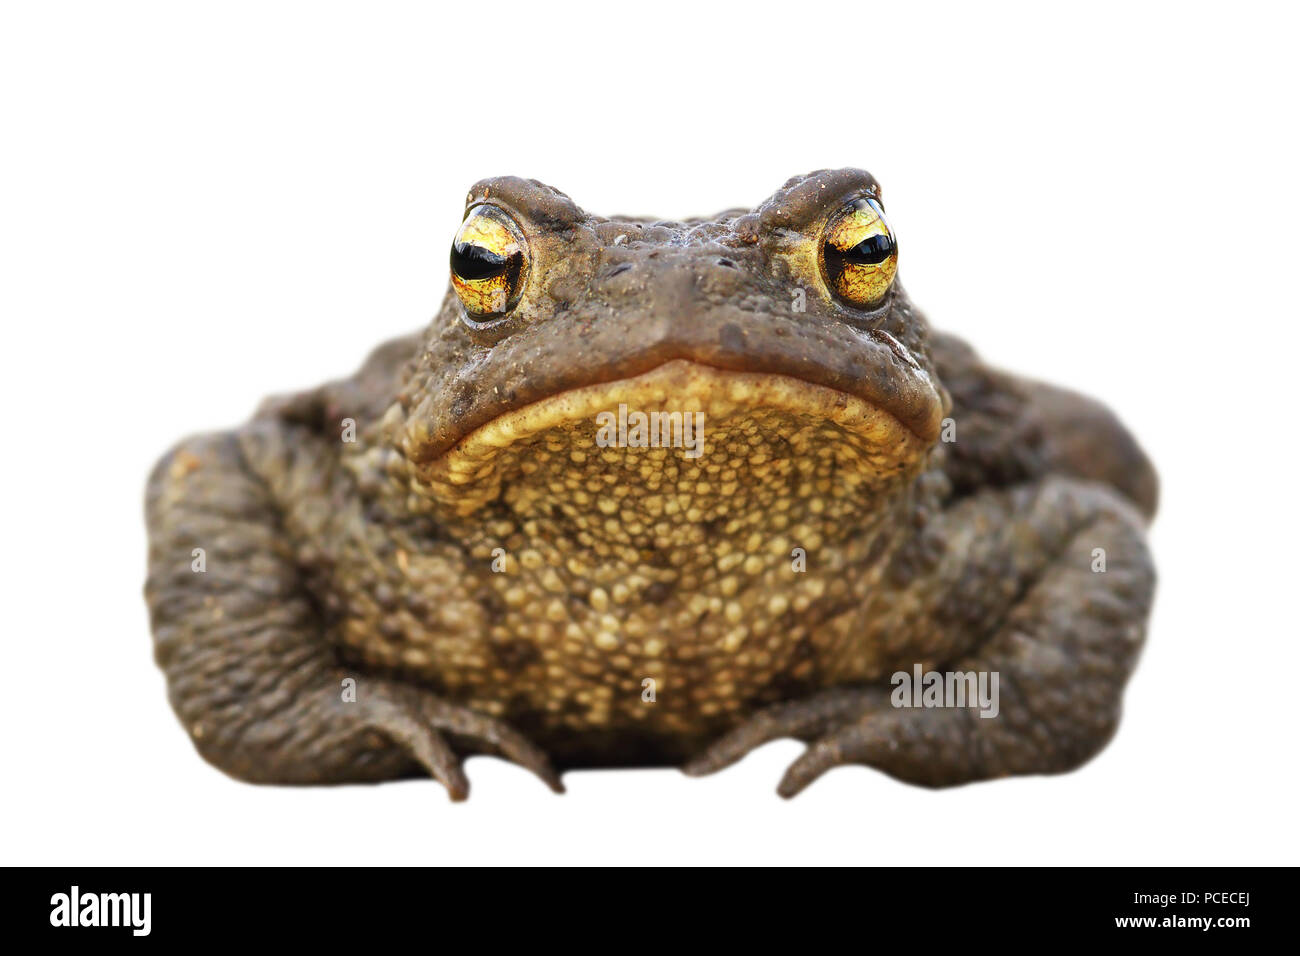 isolated brown toad front view ( Bufo bufo ), full length wild animal Stock Photo